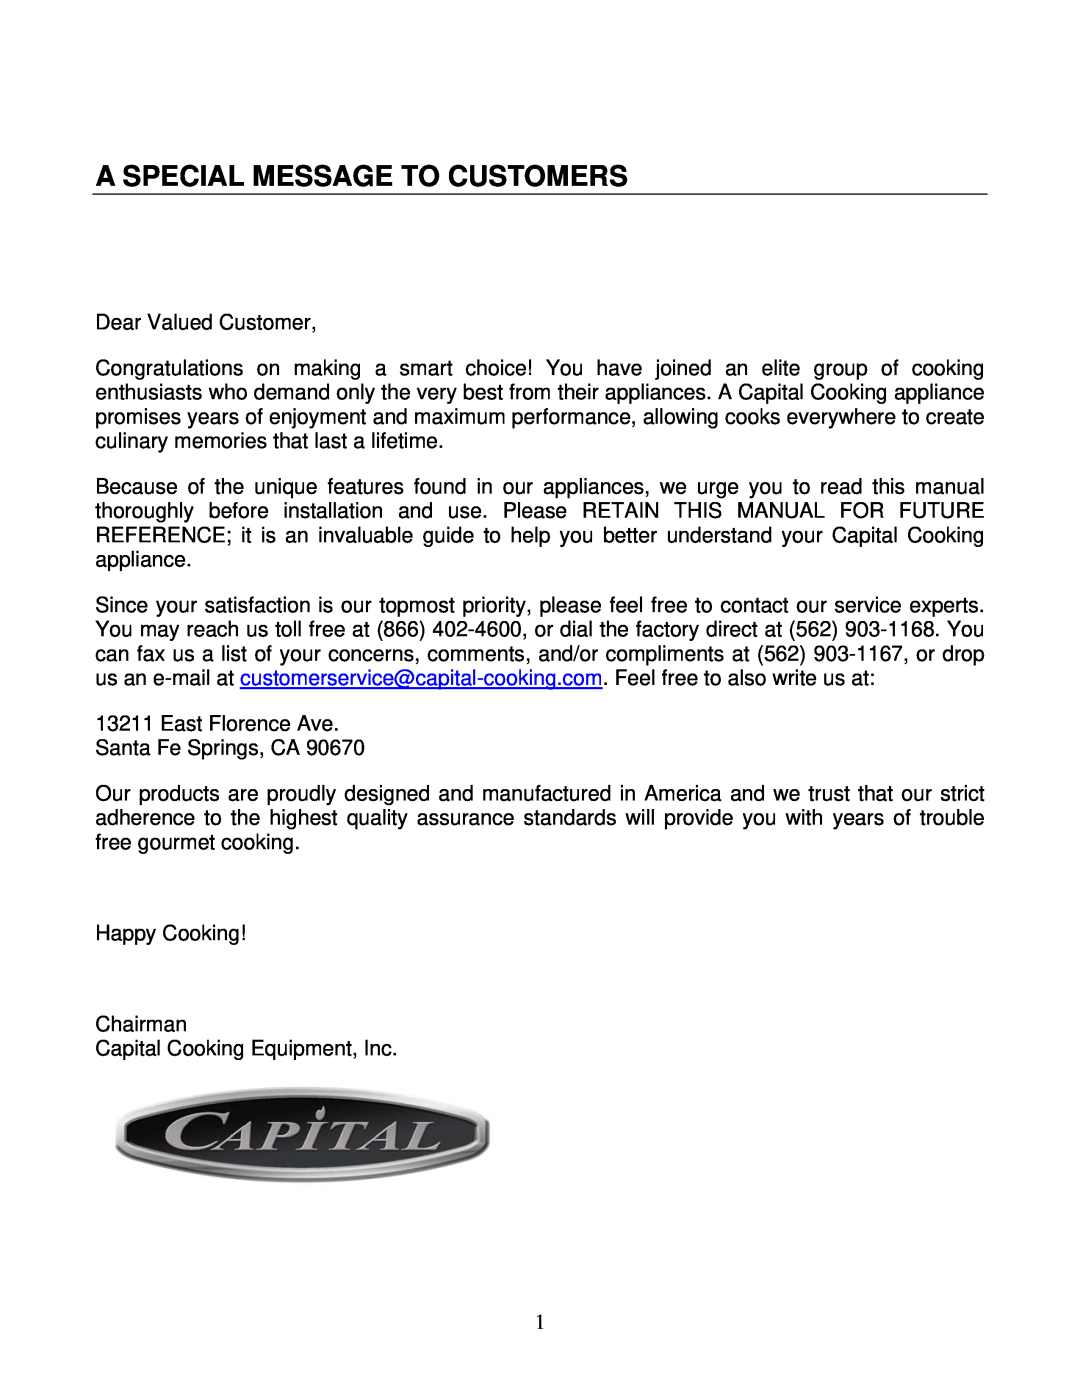 Capital Cooking MWO301ES, MWO302ES manual A Special Message To Customers 